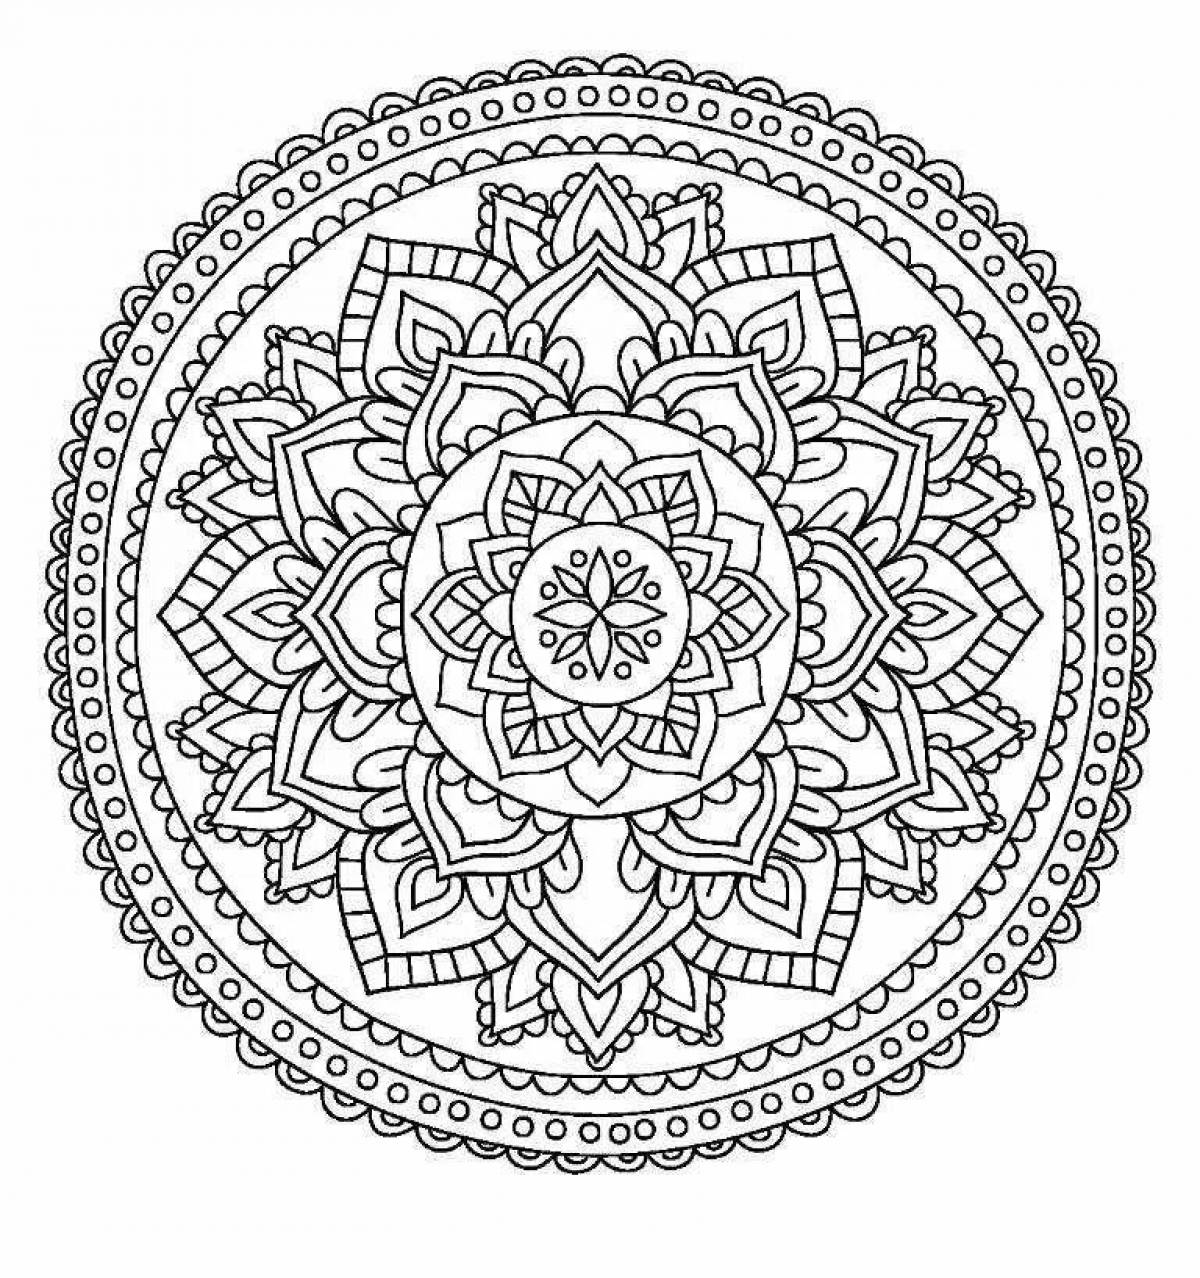 Mandala for good luck and success in everything #6